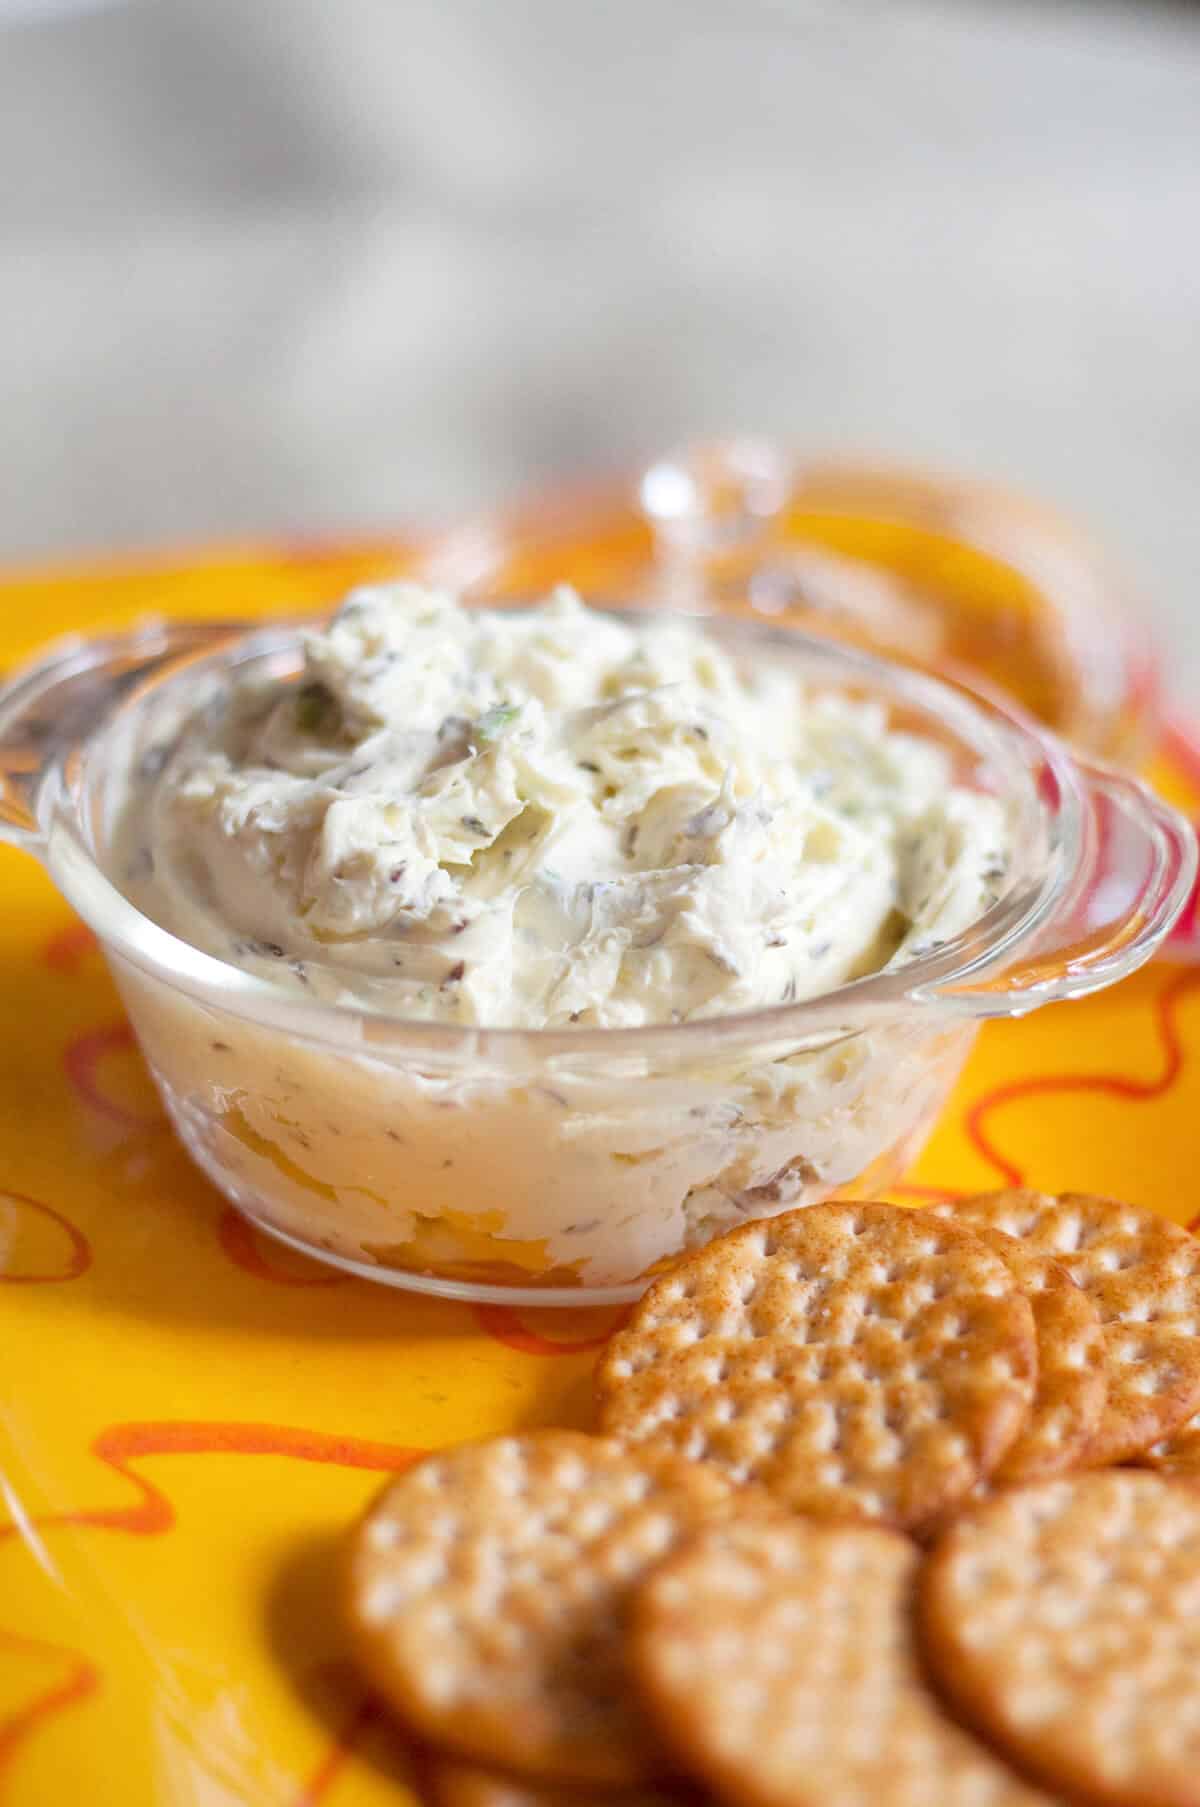 Caraway cheese spread in a glass bowl.